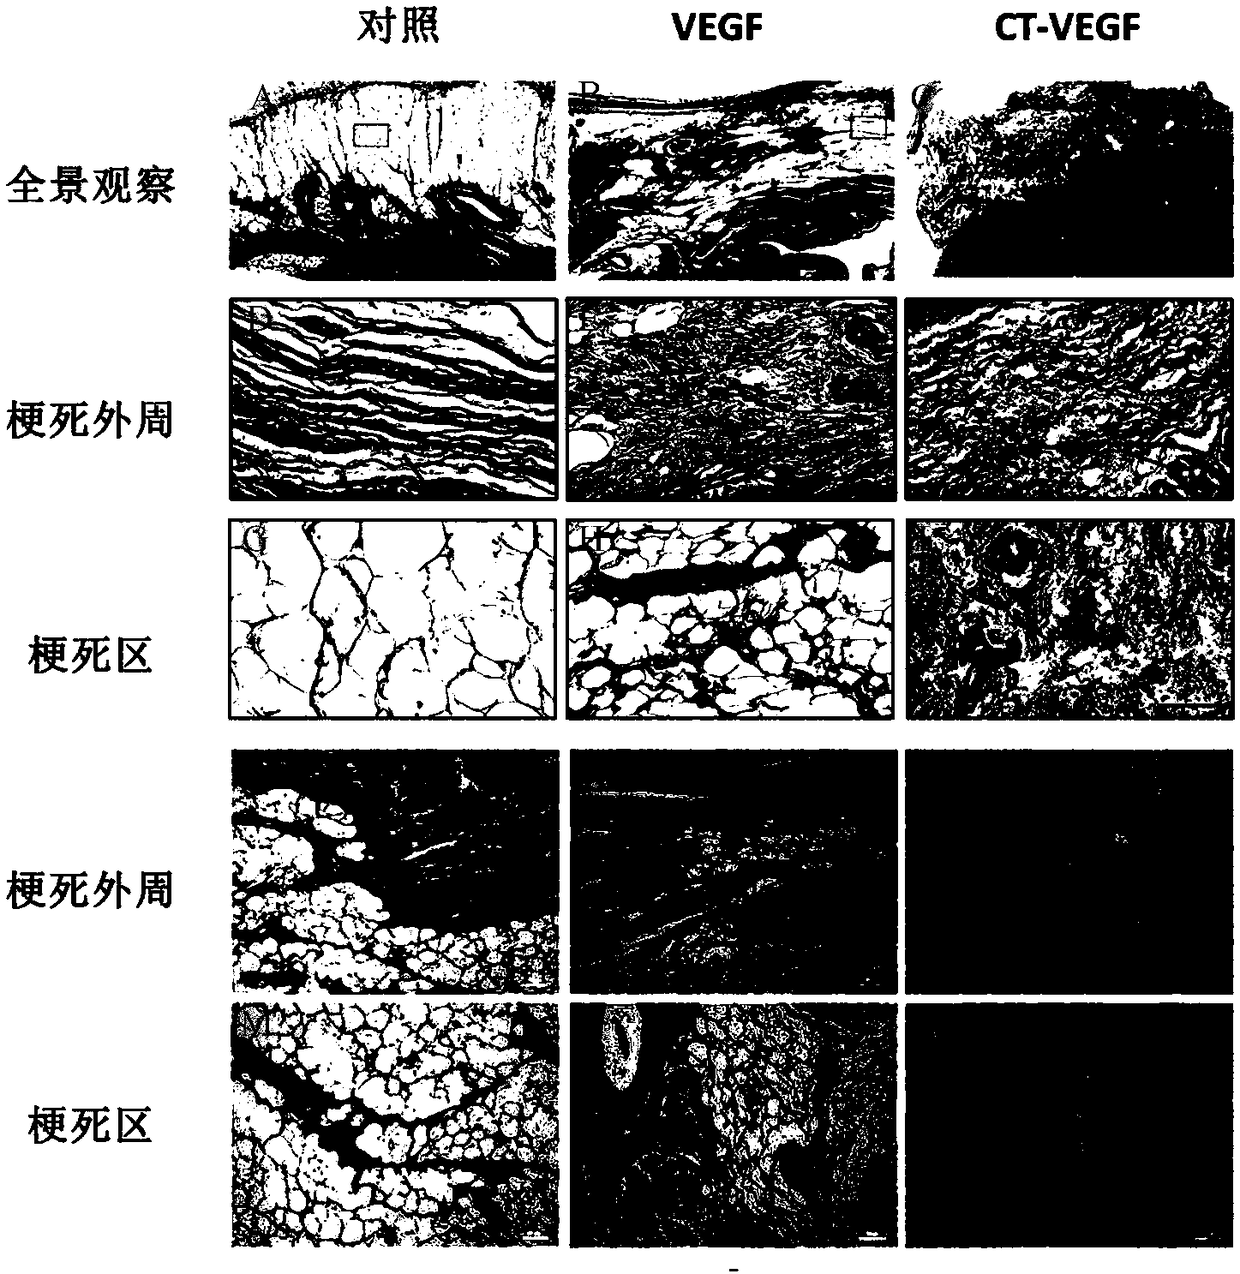 Application of collagen targeted vascular endothelial growth factors in old myocardial infarction treatment